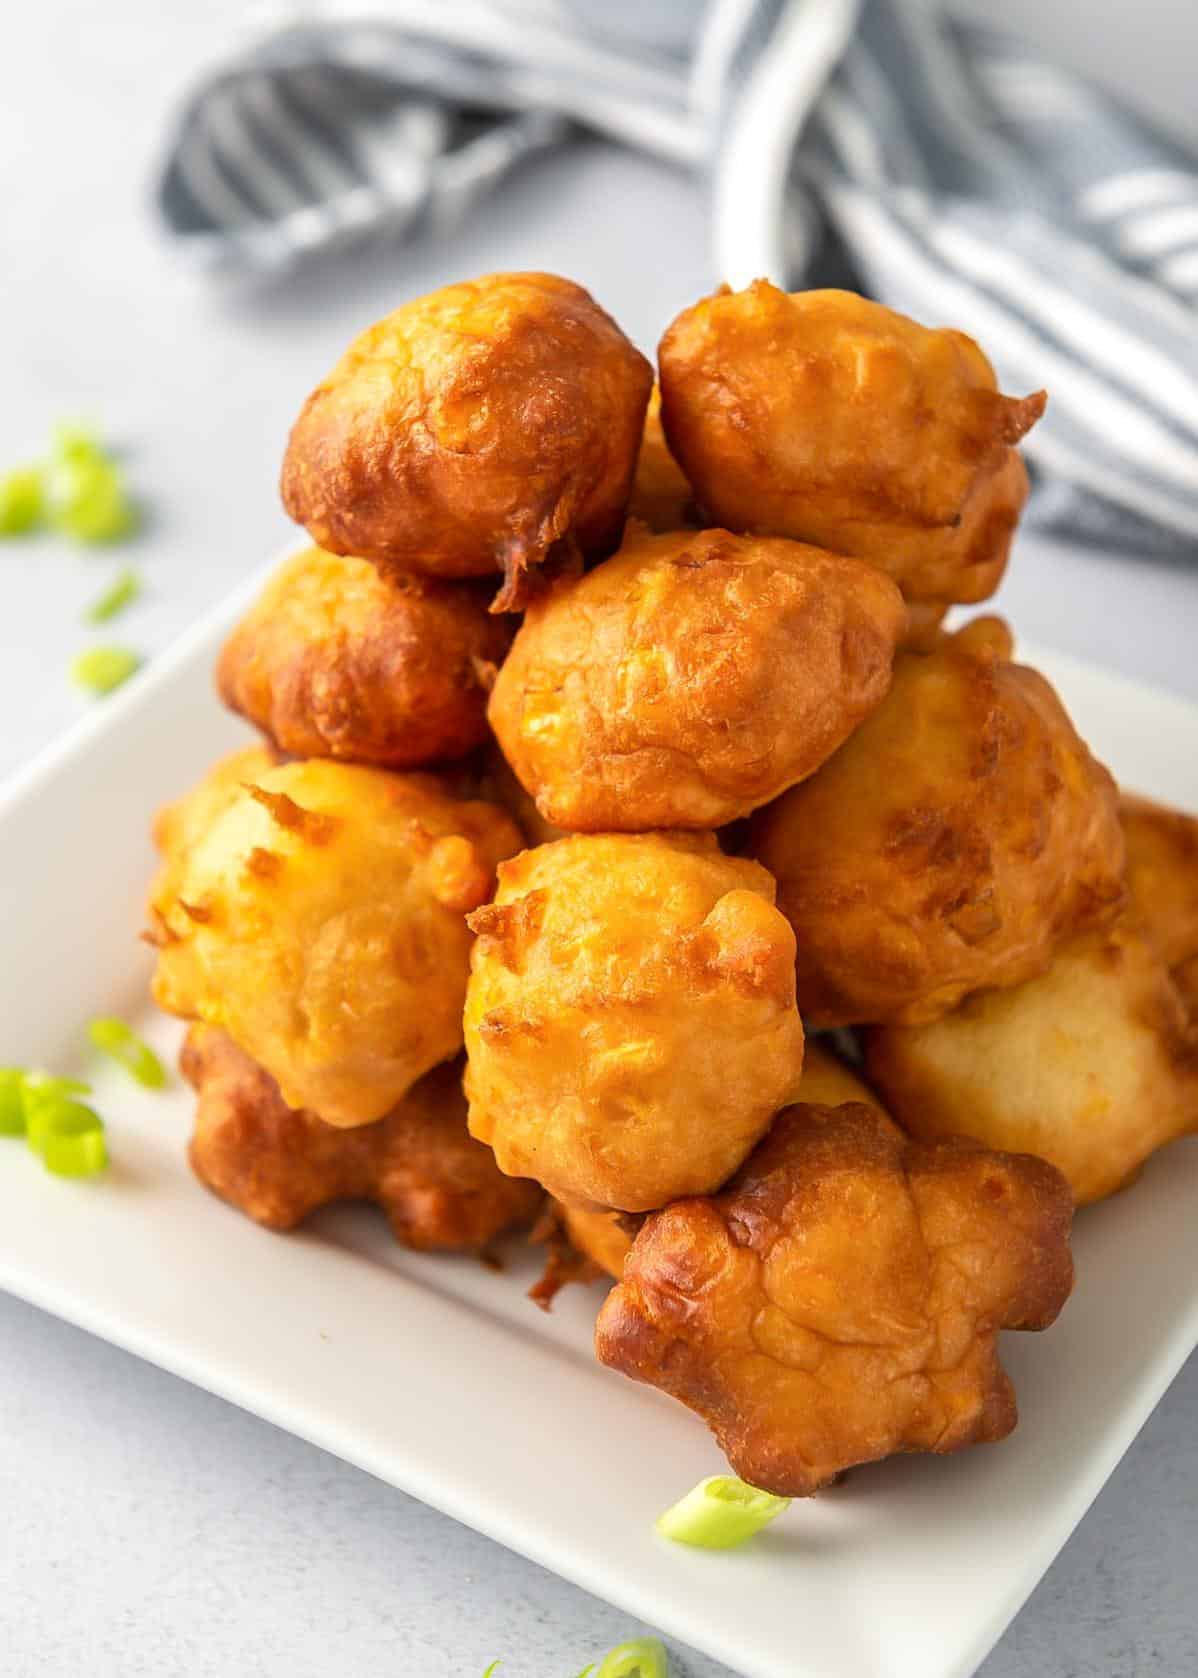  These corn ball fritters are the perfect combination of sweet and savory.